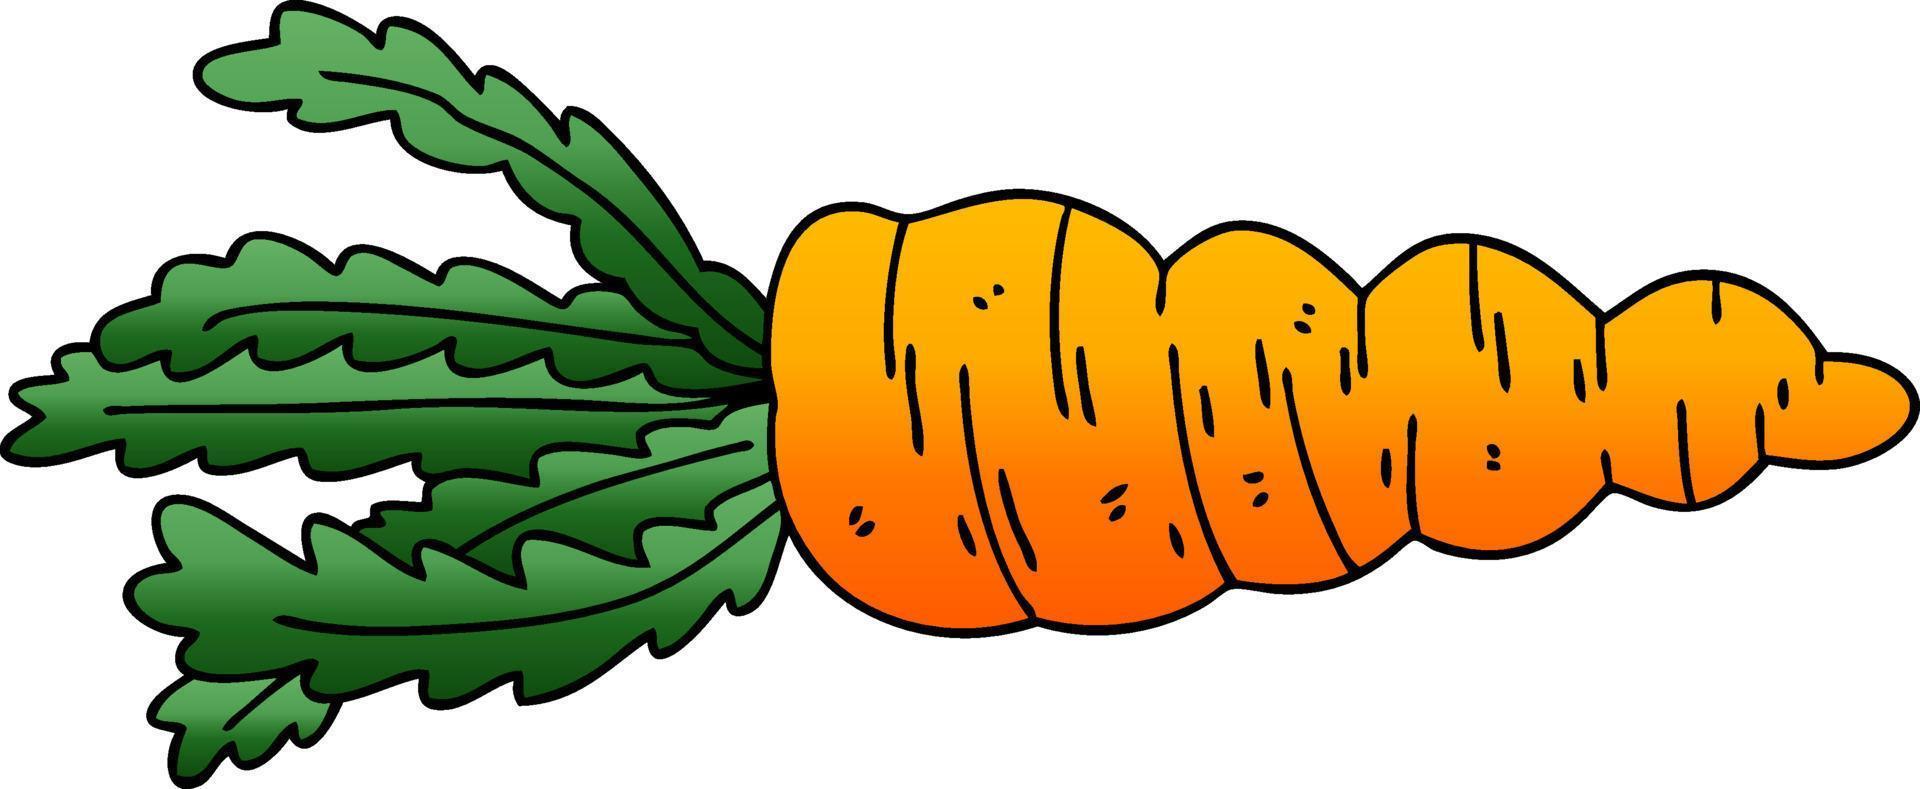 quirky gradient shaded cartoon carrot vector